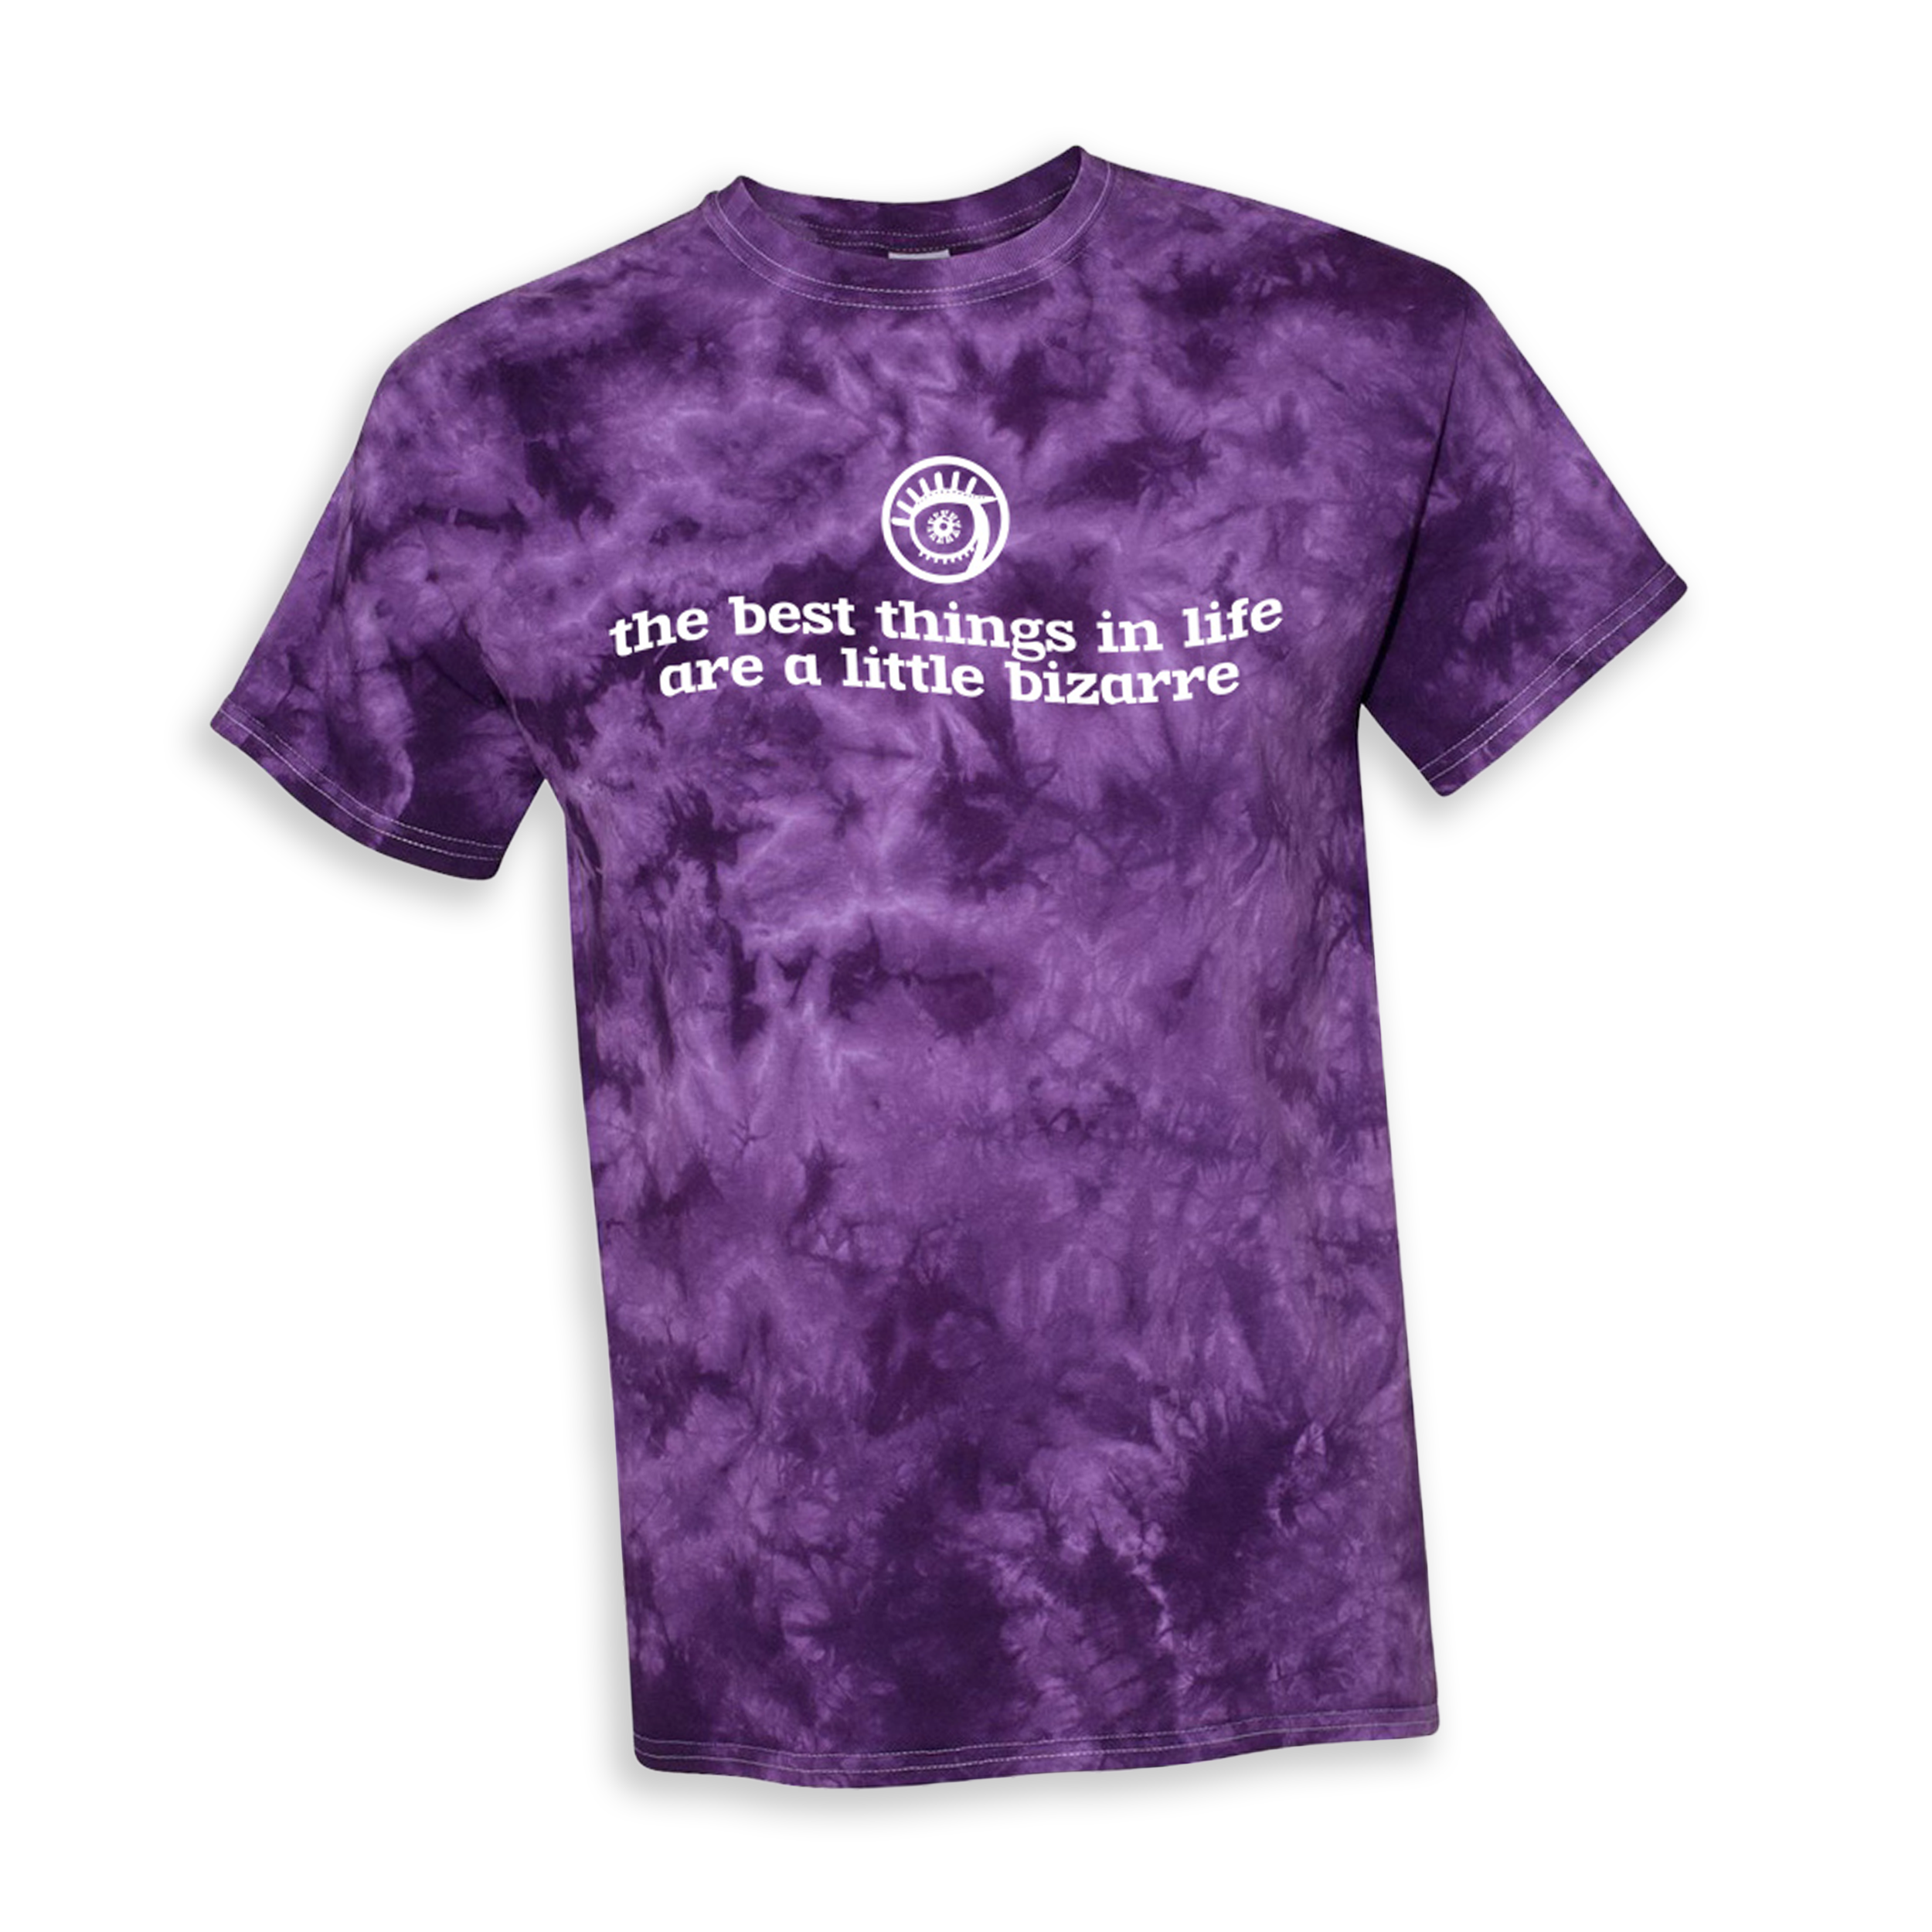 A purple tie-dye t-shirt that has the Bizarre Coffee logo and says "the best things in life are a little bizarre."